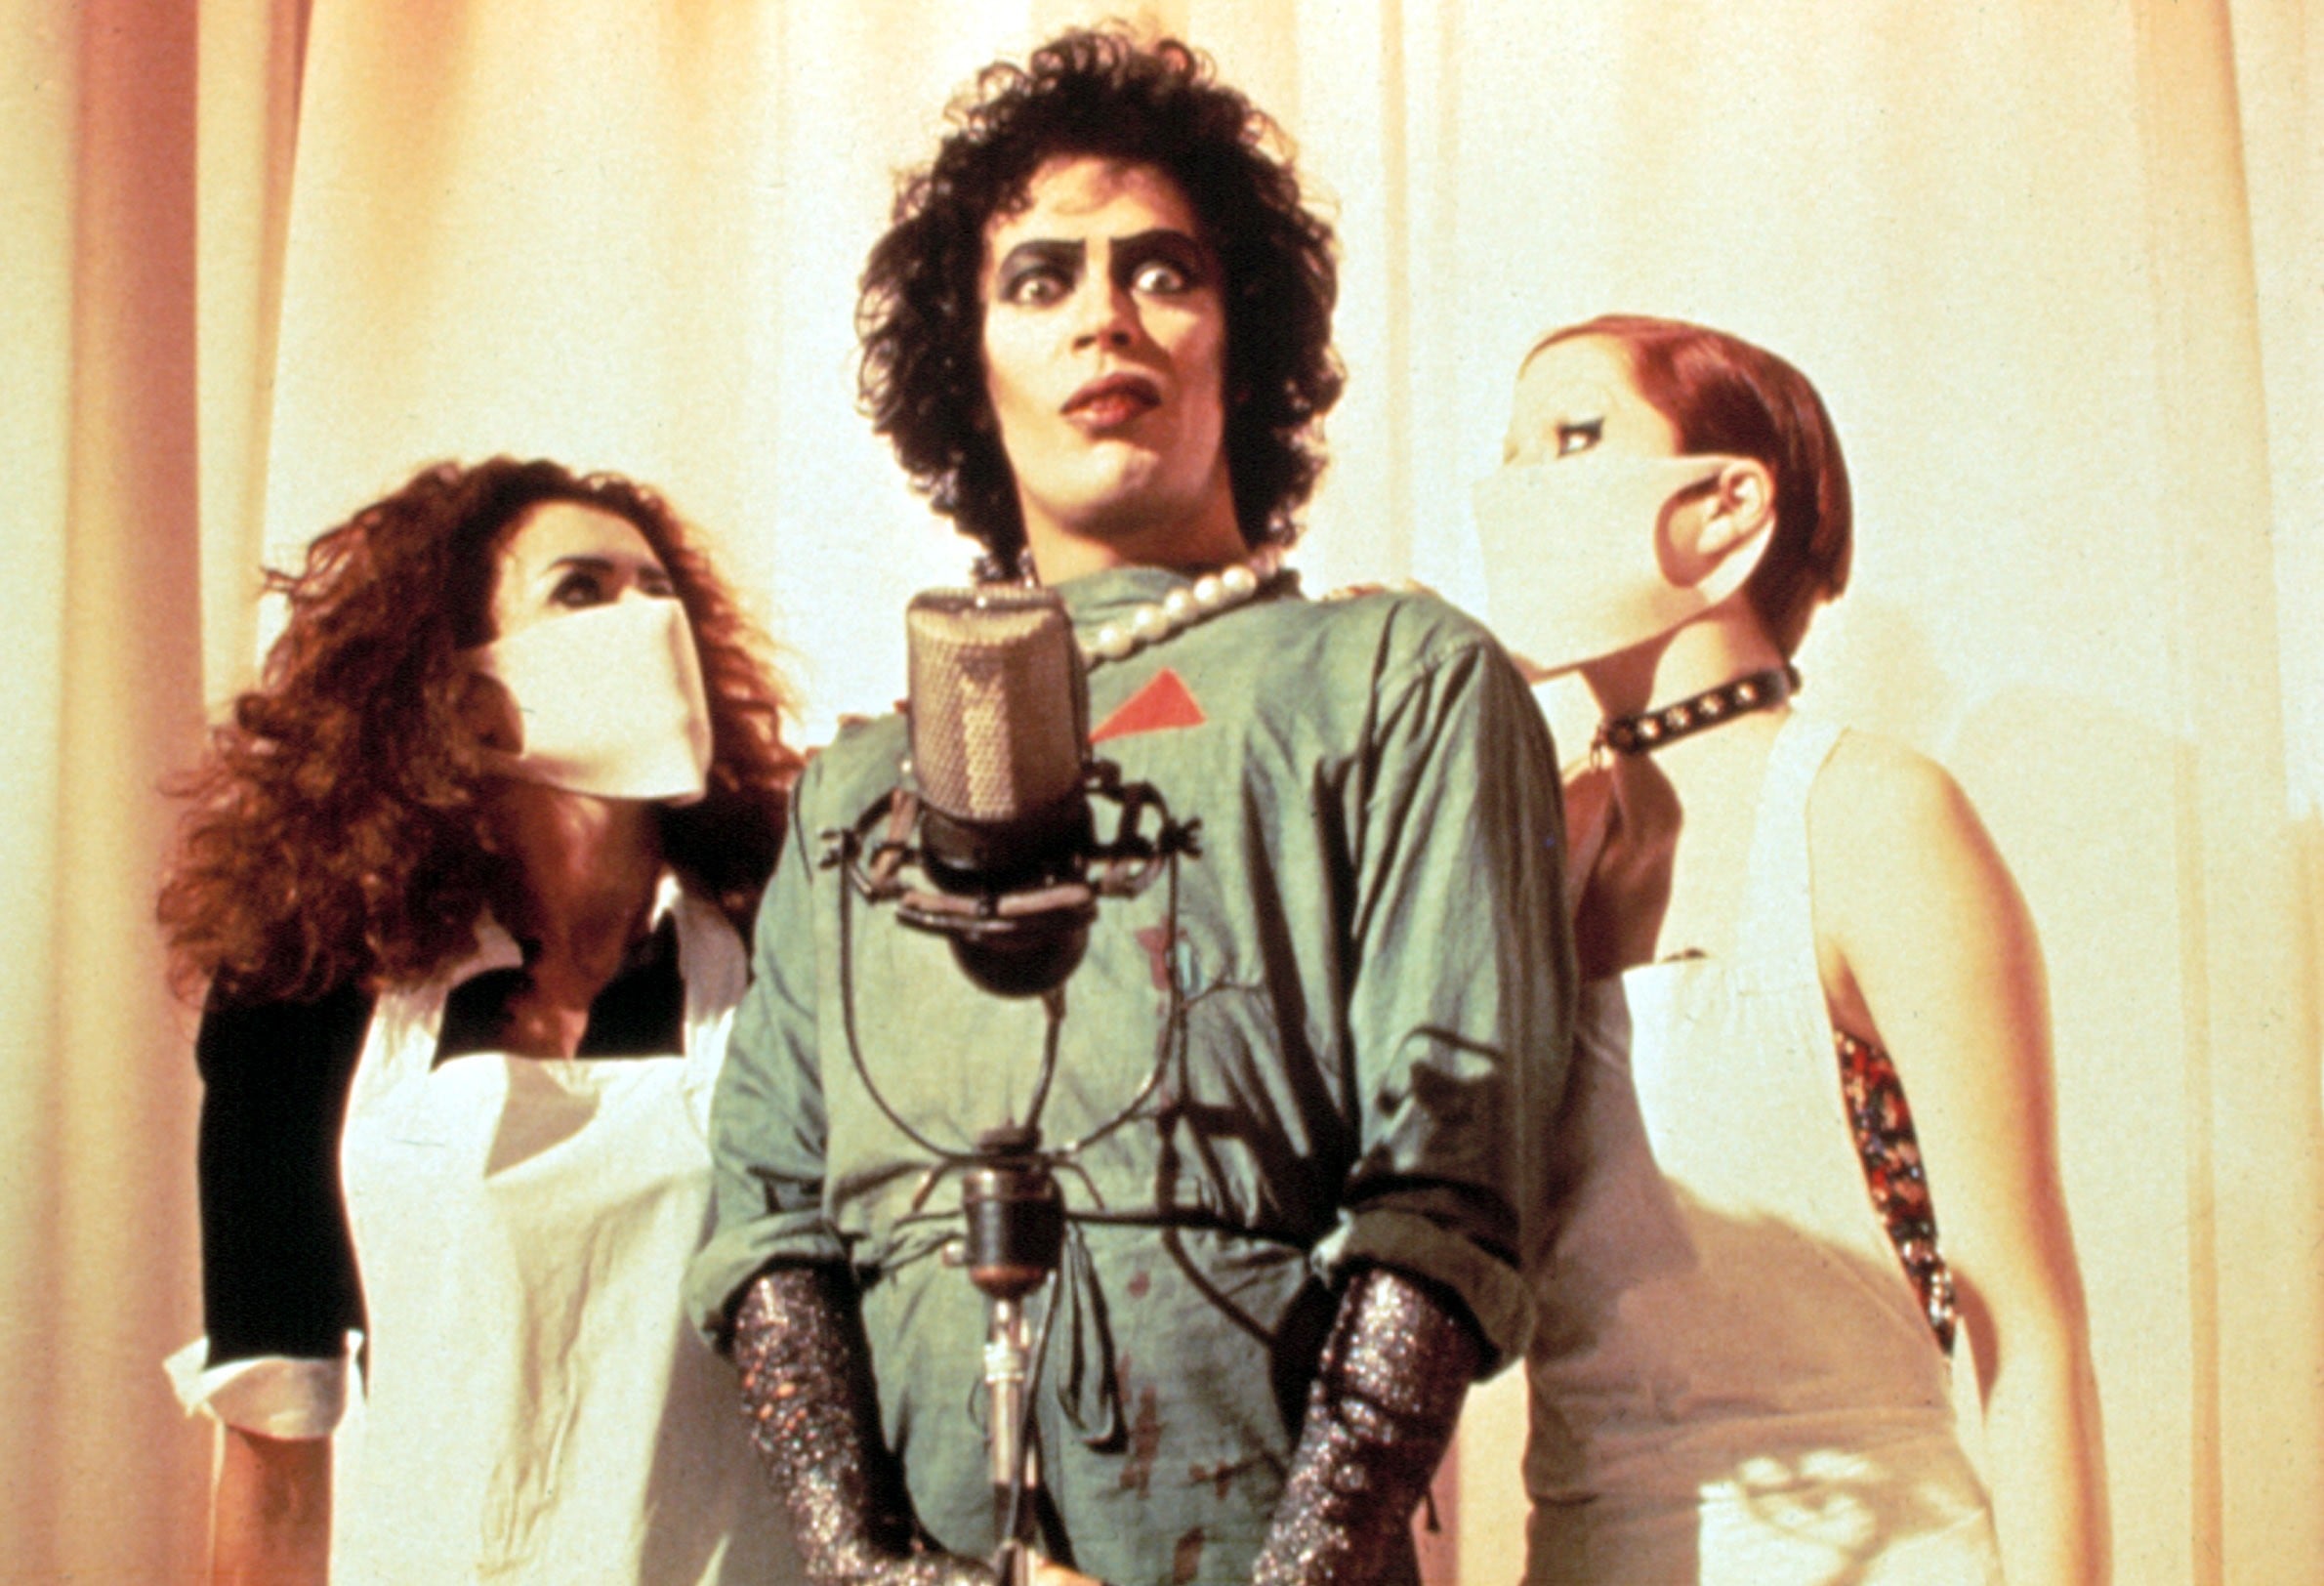 Everything You Need to Know Before Your First Rocky Horror Picture Show